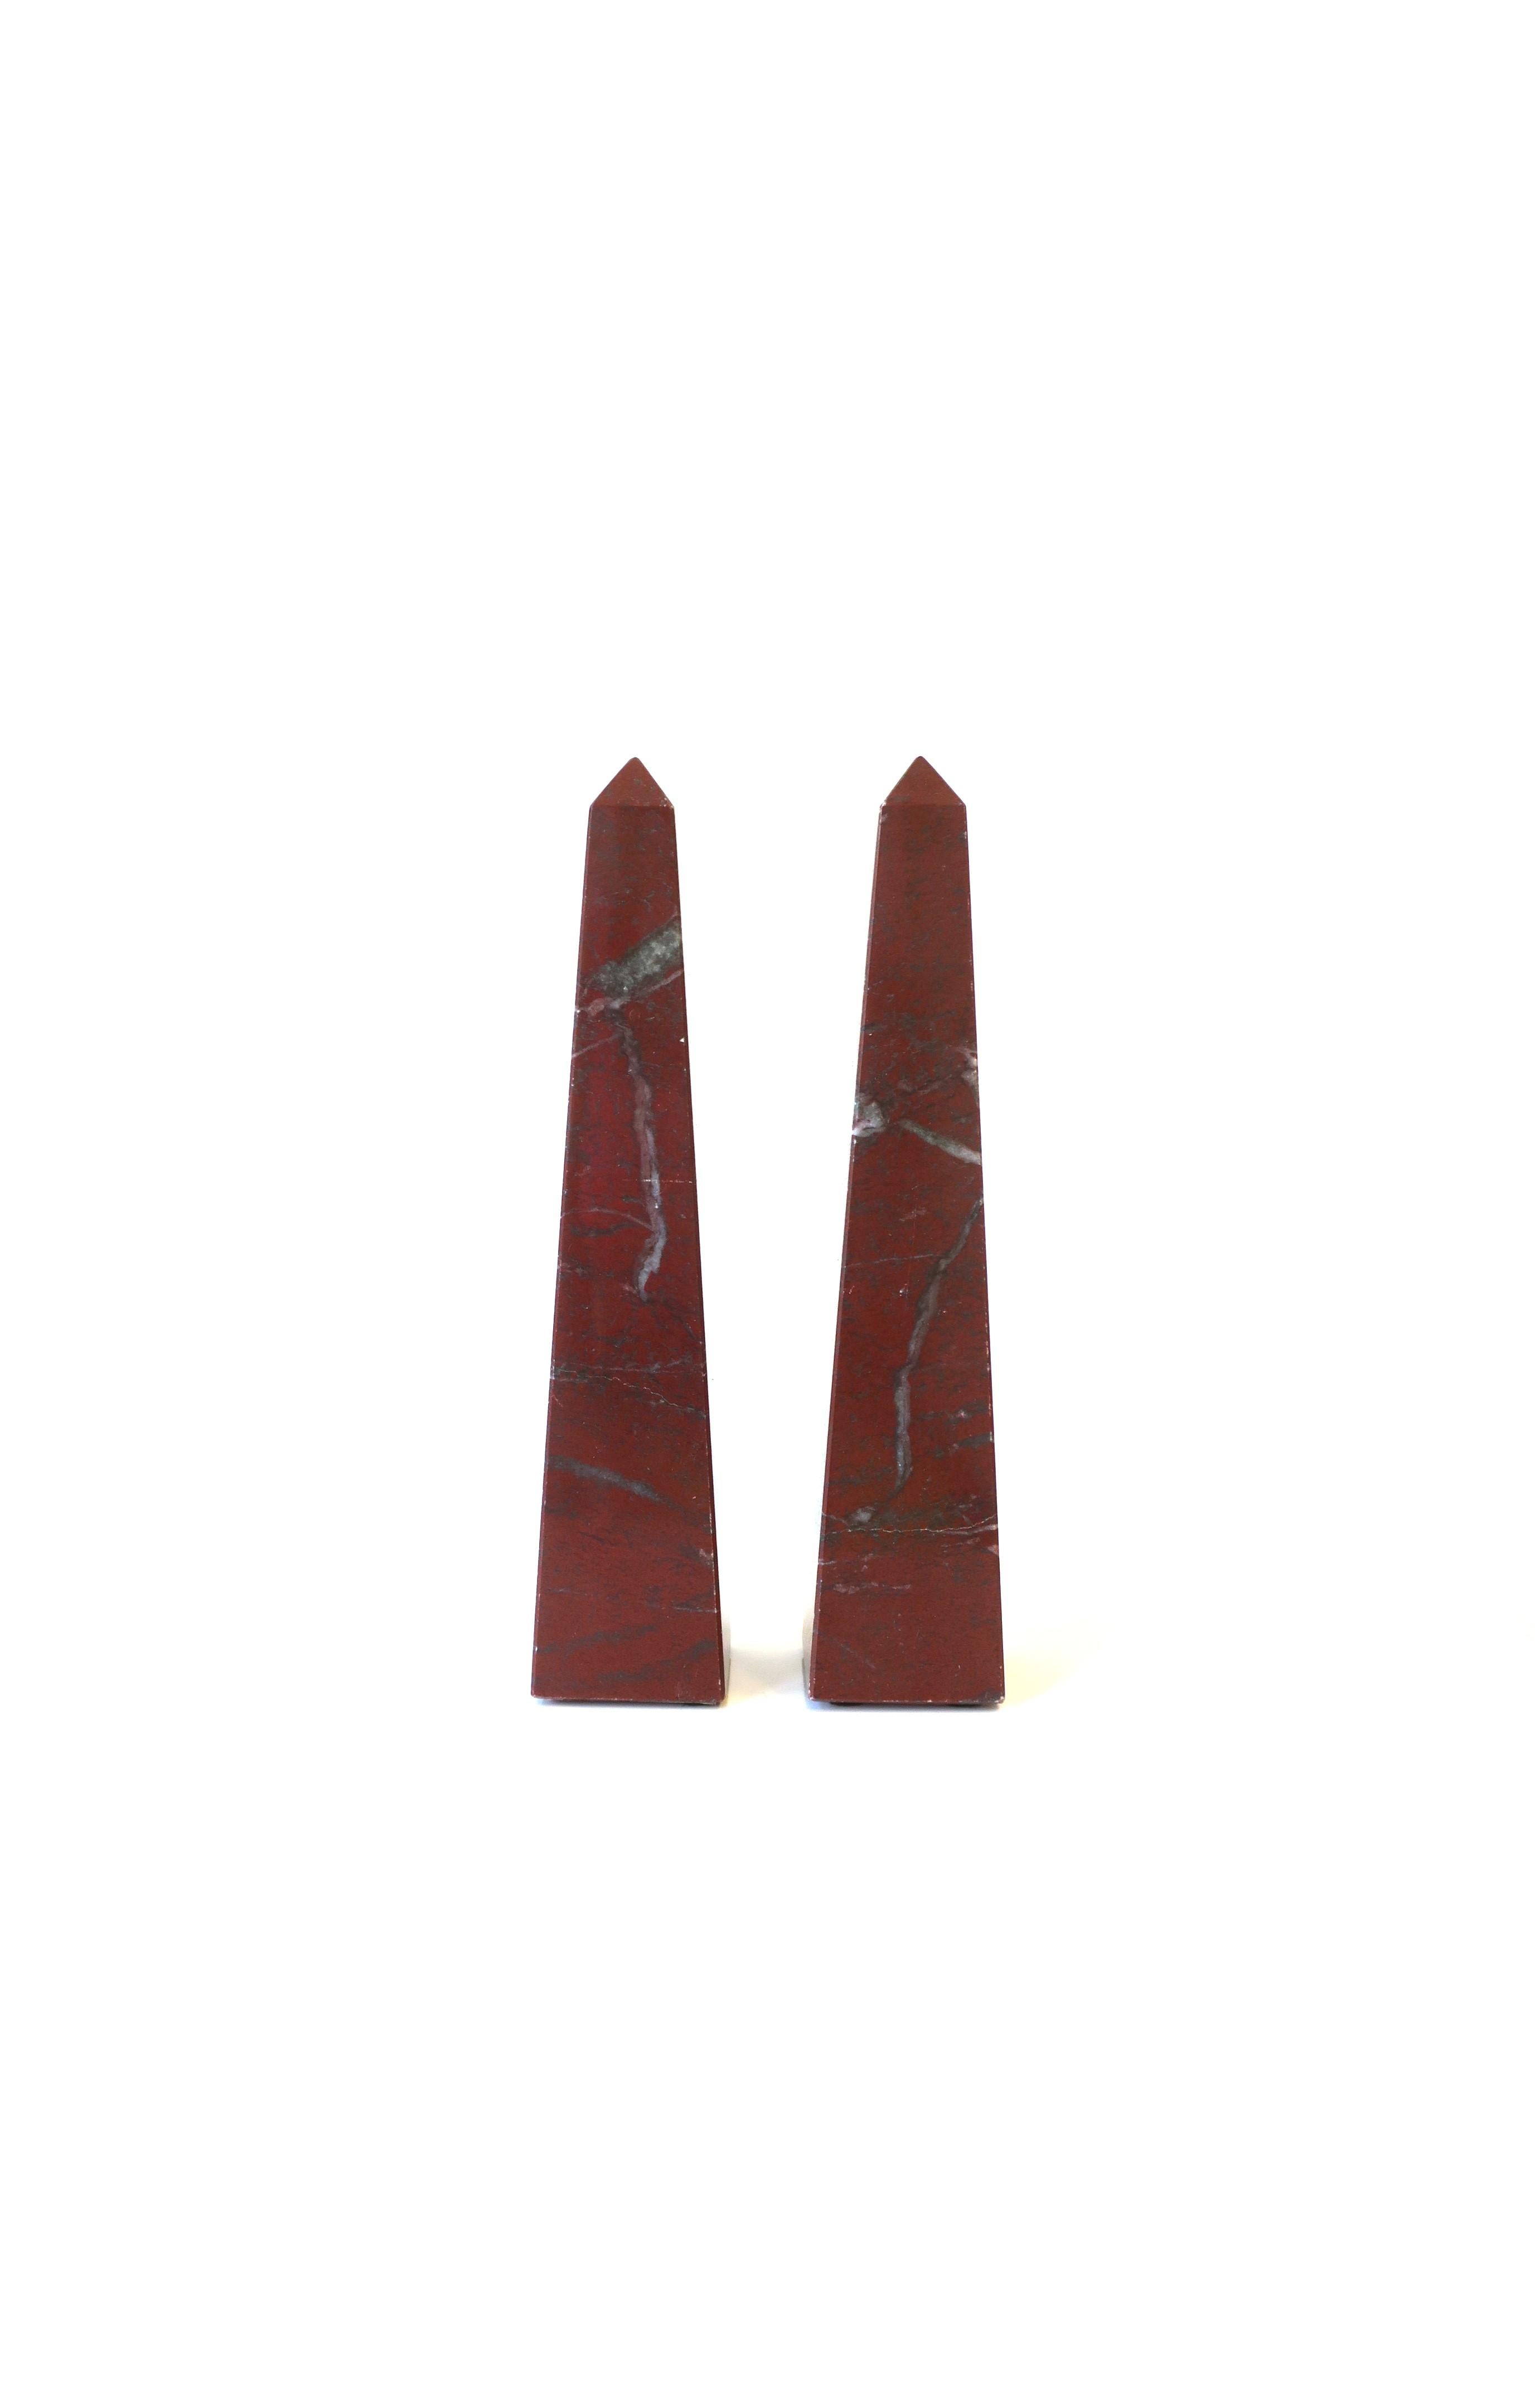 A beautiful pair of red burgundy Italian modern marble Obelisks, circa 1970s, Italy. Solid red burgundy marble with grey veining. Marked on bottom, 'Made in Italy', as shown in last image. A great set for any cocktail table, mantle, bookshelf,